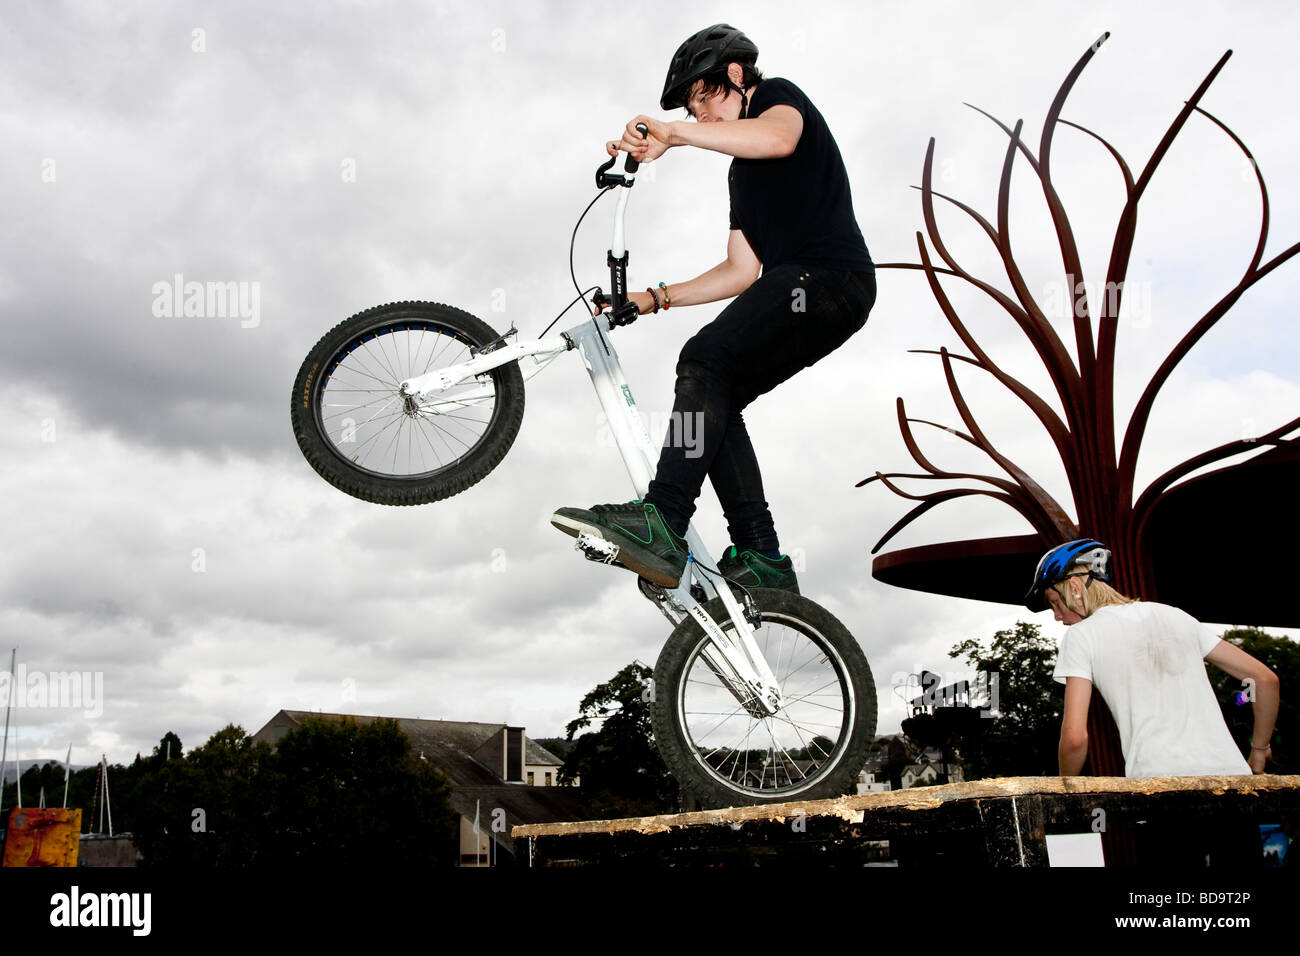 Bike Trial Bike Boy Jumping Stunt Rider High Resolution Stock Photography  and Images - Alamy